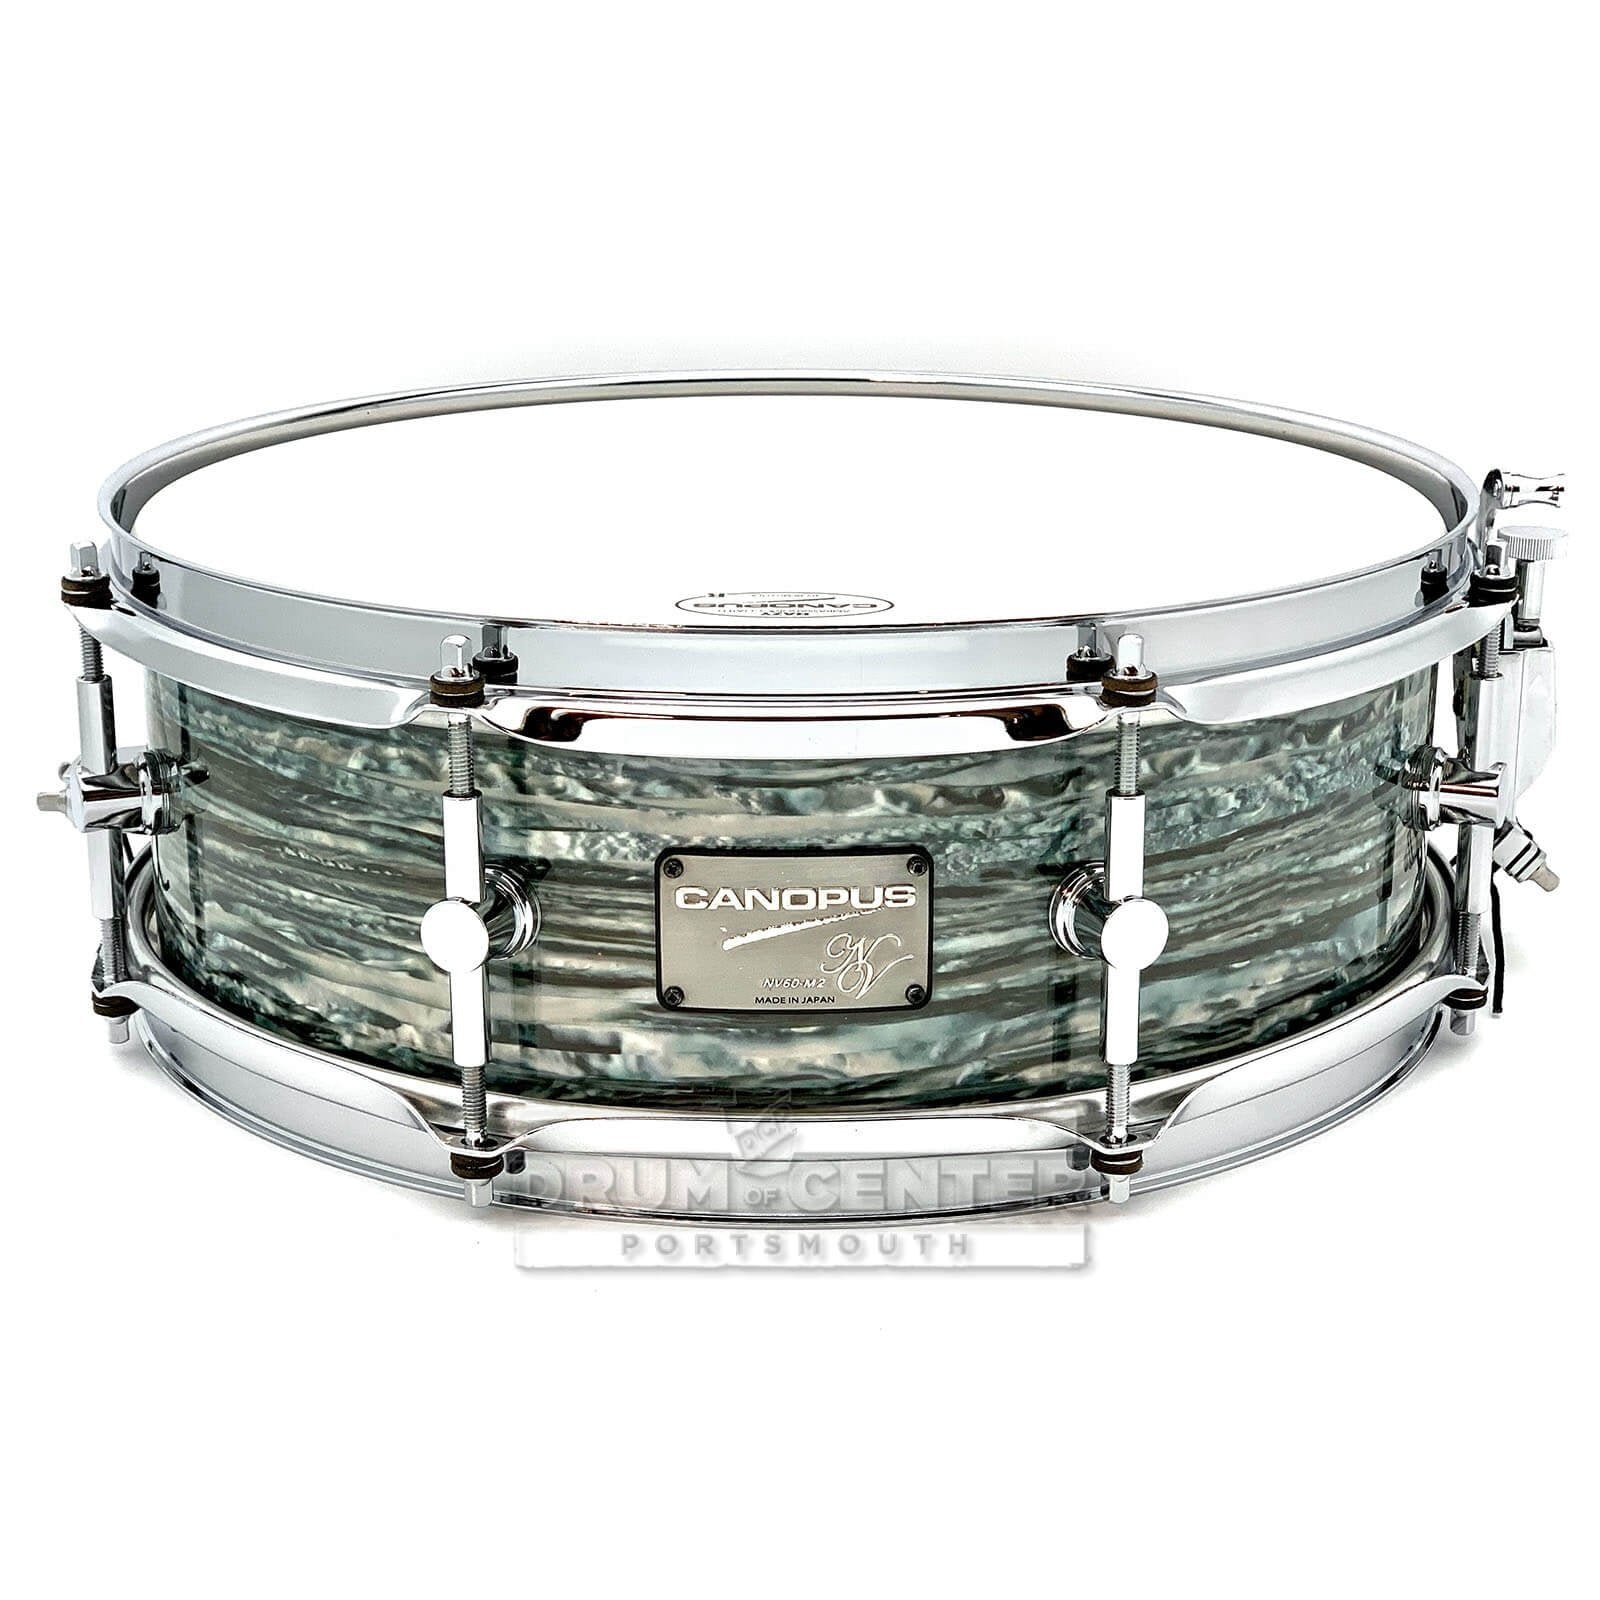 Canopus Neo Vintage M2 Snare Drum 14x5 Blue Oyster